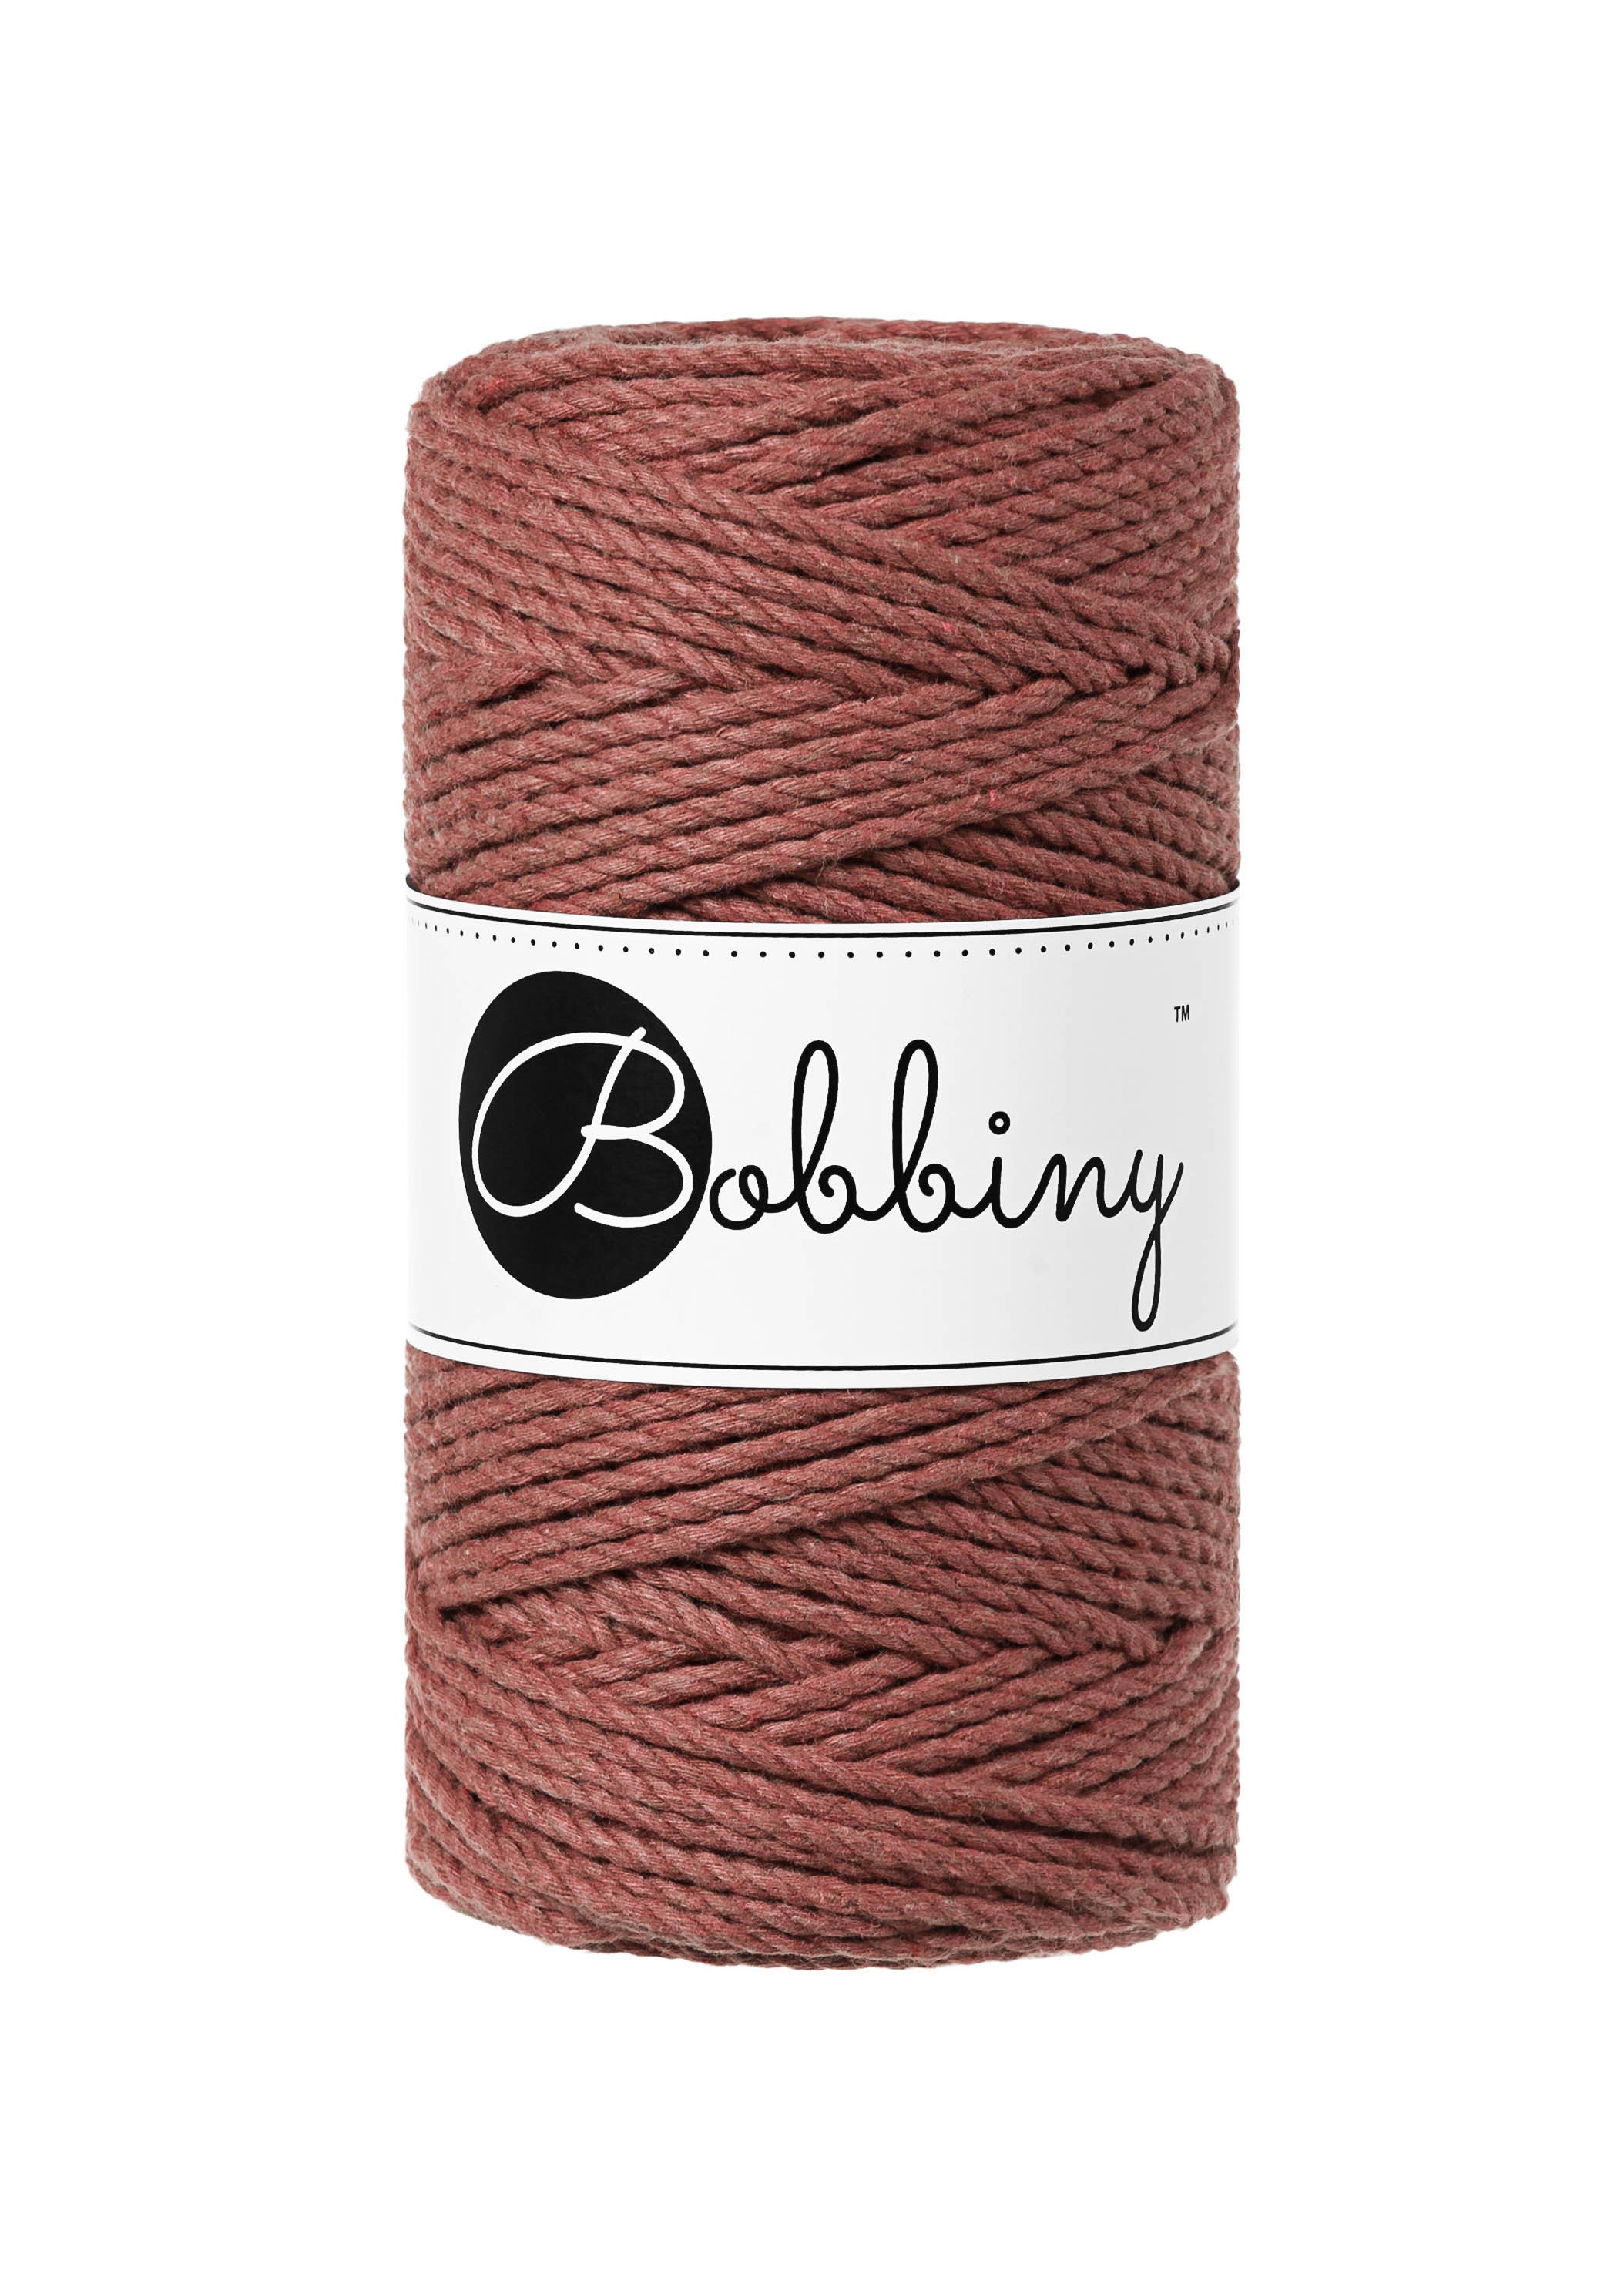 Buy Bobbiny Pine Green Cotton Cord 5mm, 108 Yards 100 Meters Braided Cotton  Cord, Certified Recycled Cotton Cord Online in India 